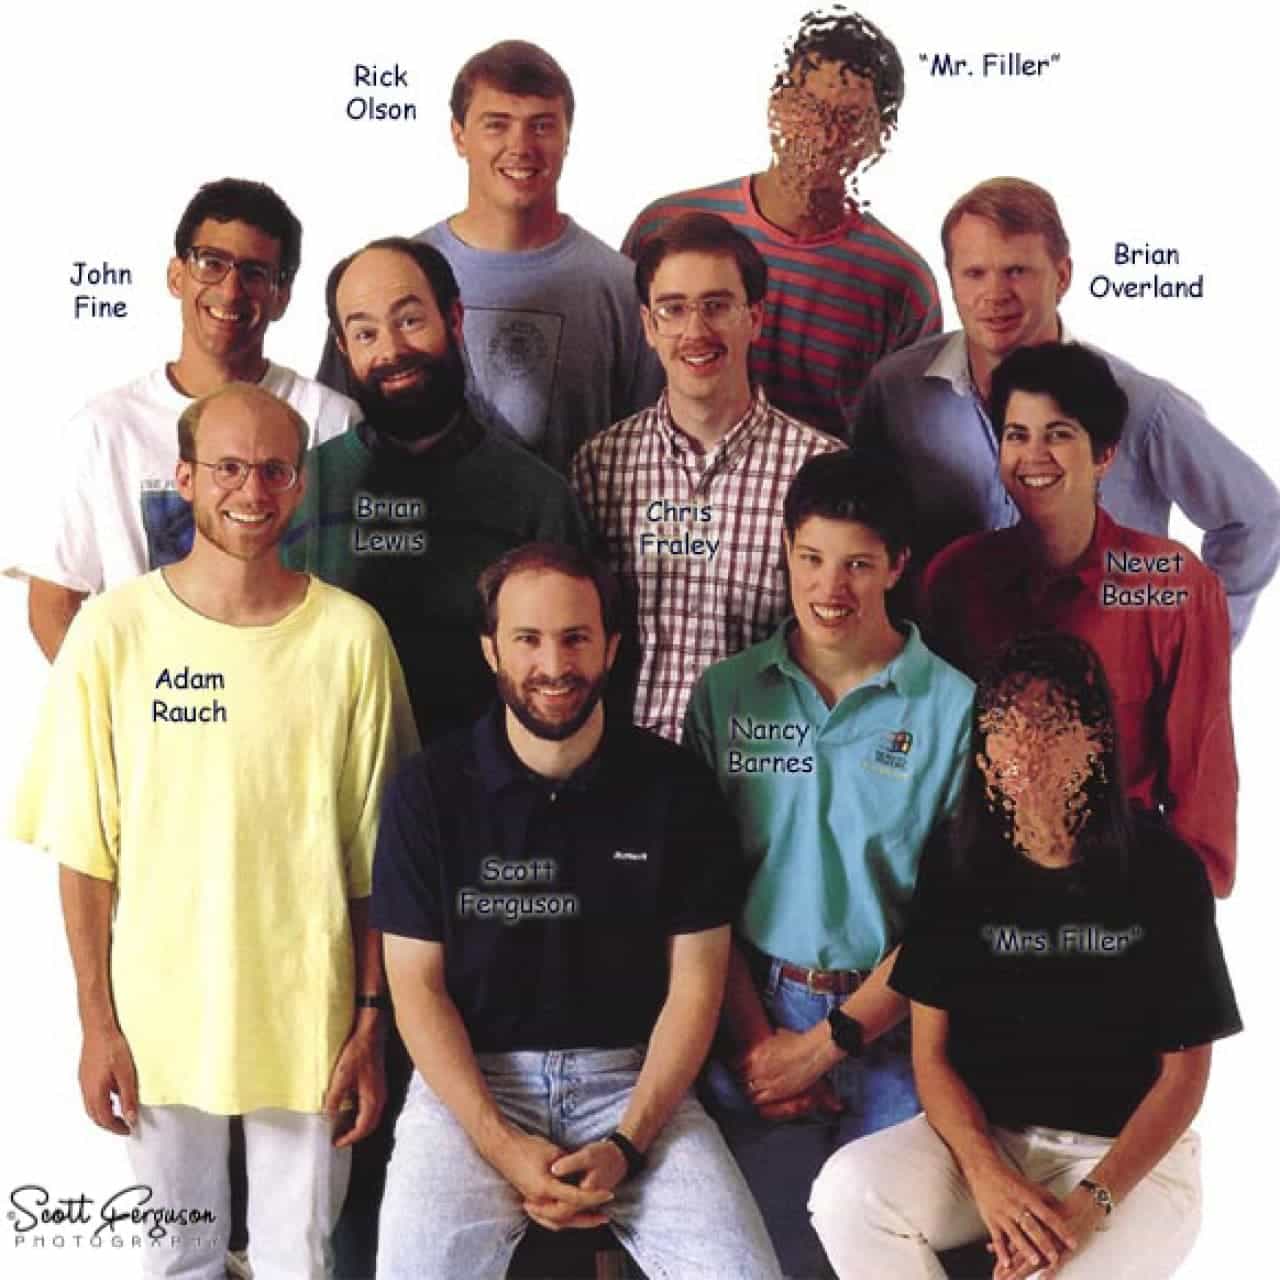 A photograph of the Visual Basic Team after Microsoft 1.0 shipped. It includes the names of several members: John Fine, Adam Rauch, Rick Olson, Scott Ferguson, Chris Fraley, Nancy Barnes, Brian Overland, Nevet Basket, and Mr. and Mrs. Filler.